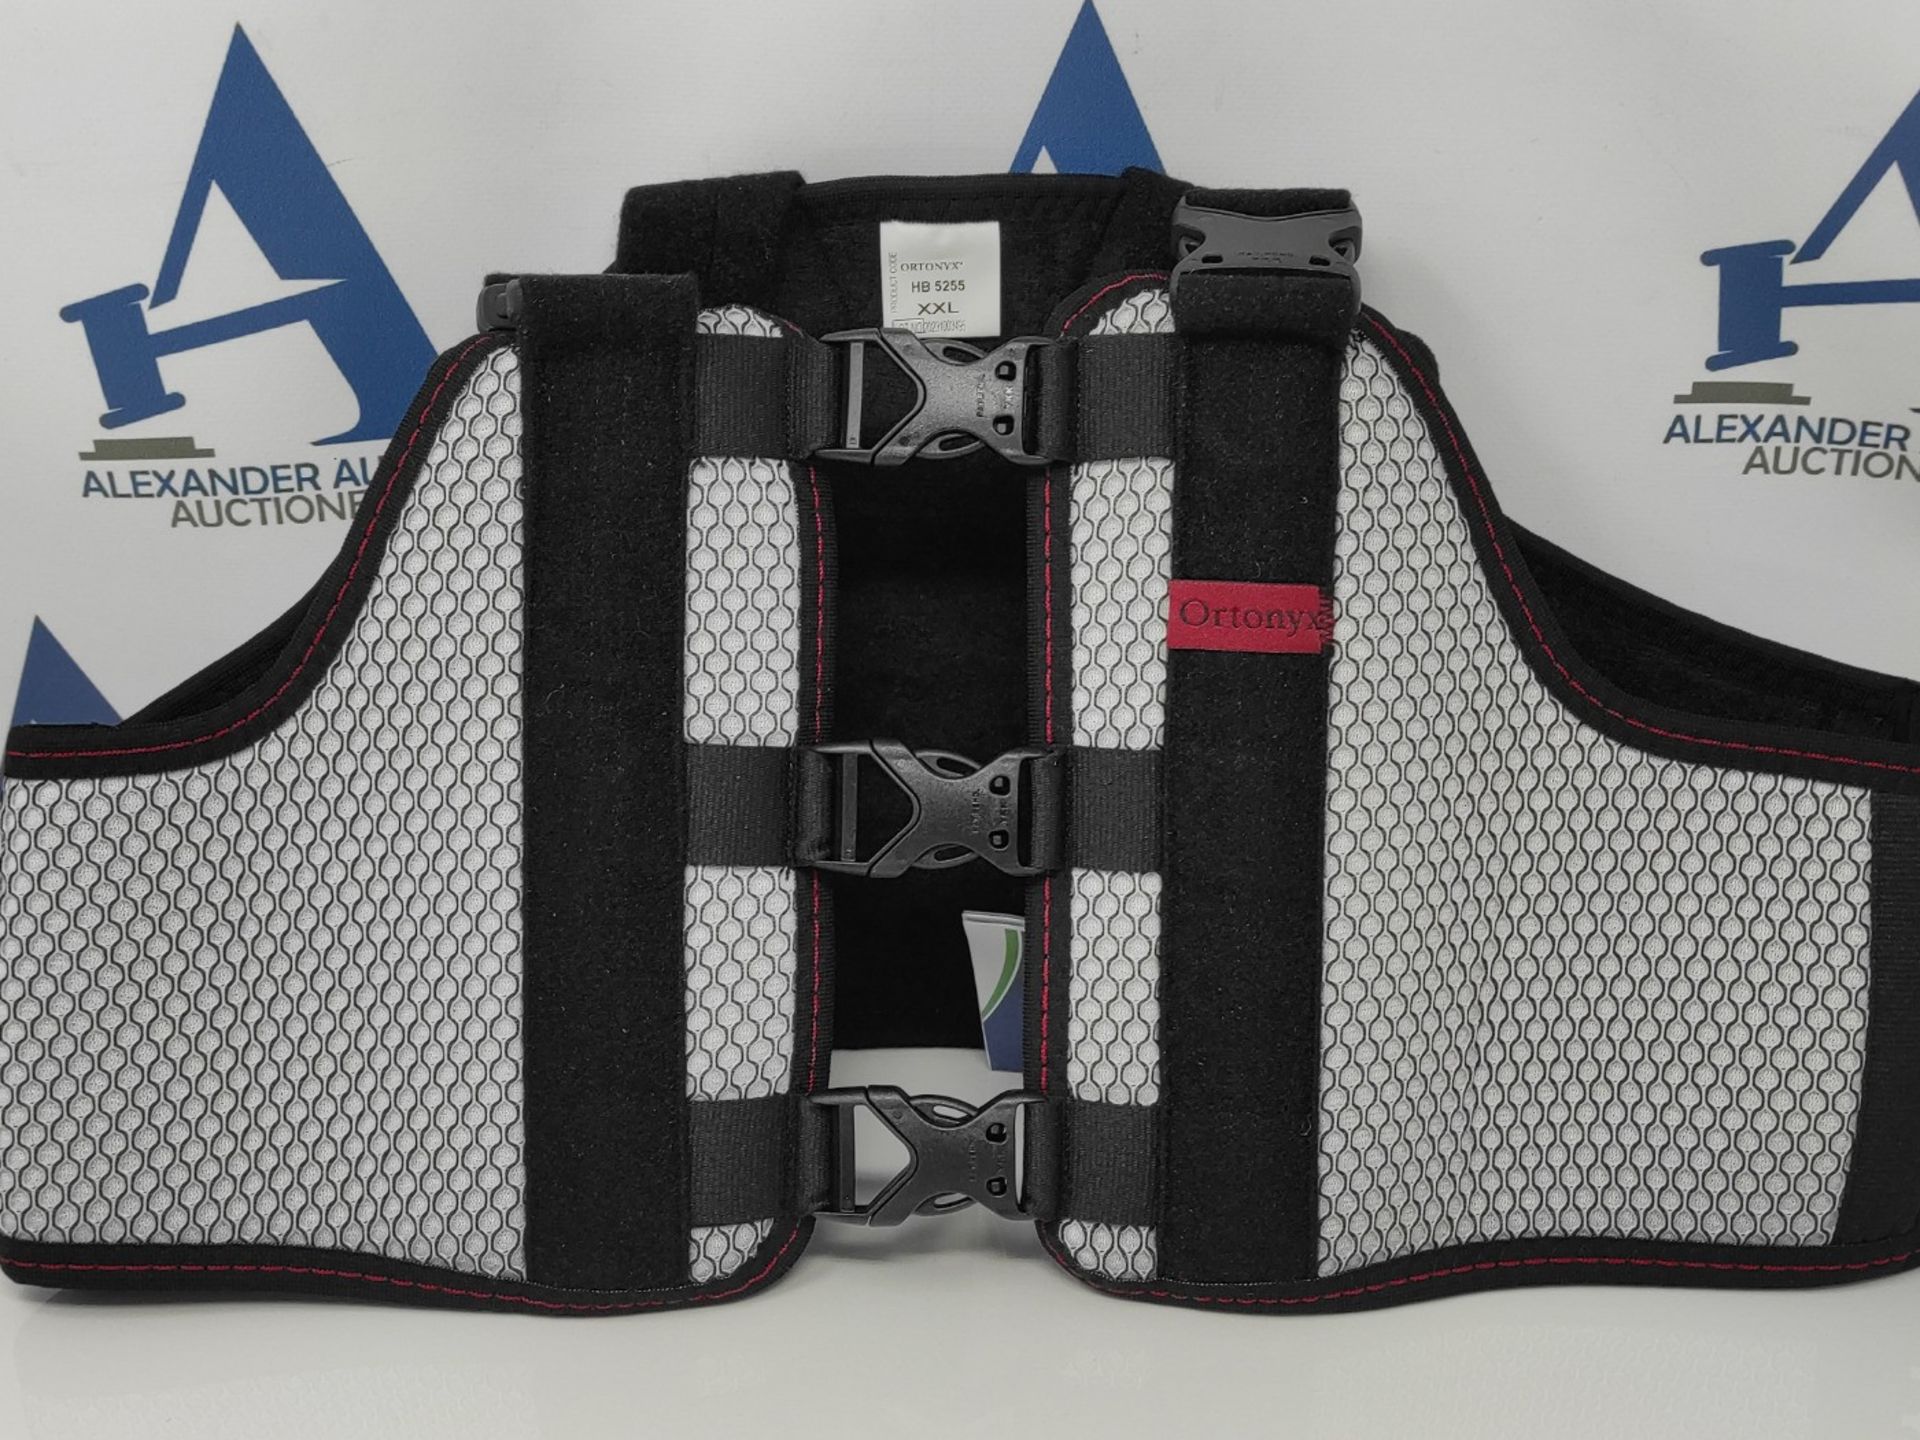 ORTONYX Sternum and Thorax Support Chest Brace / ACHB5255-XXL - Image 2 of 2